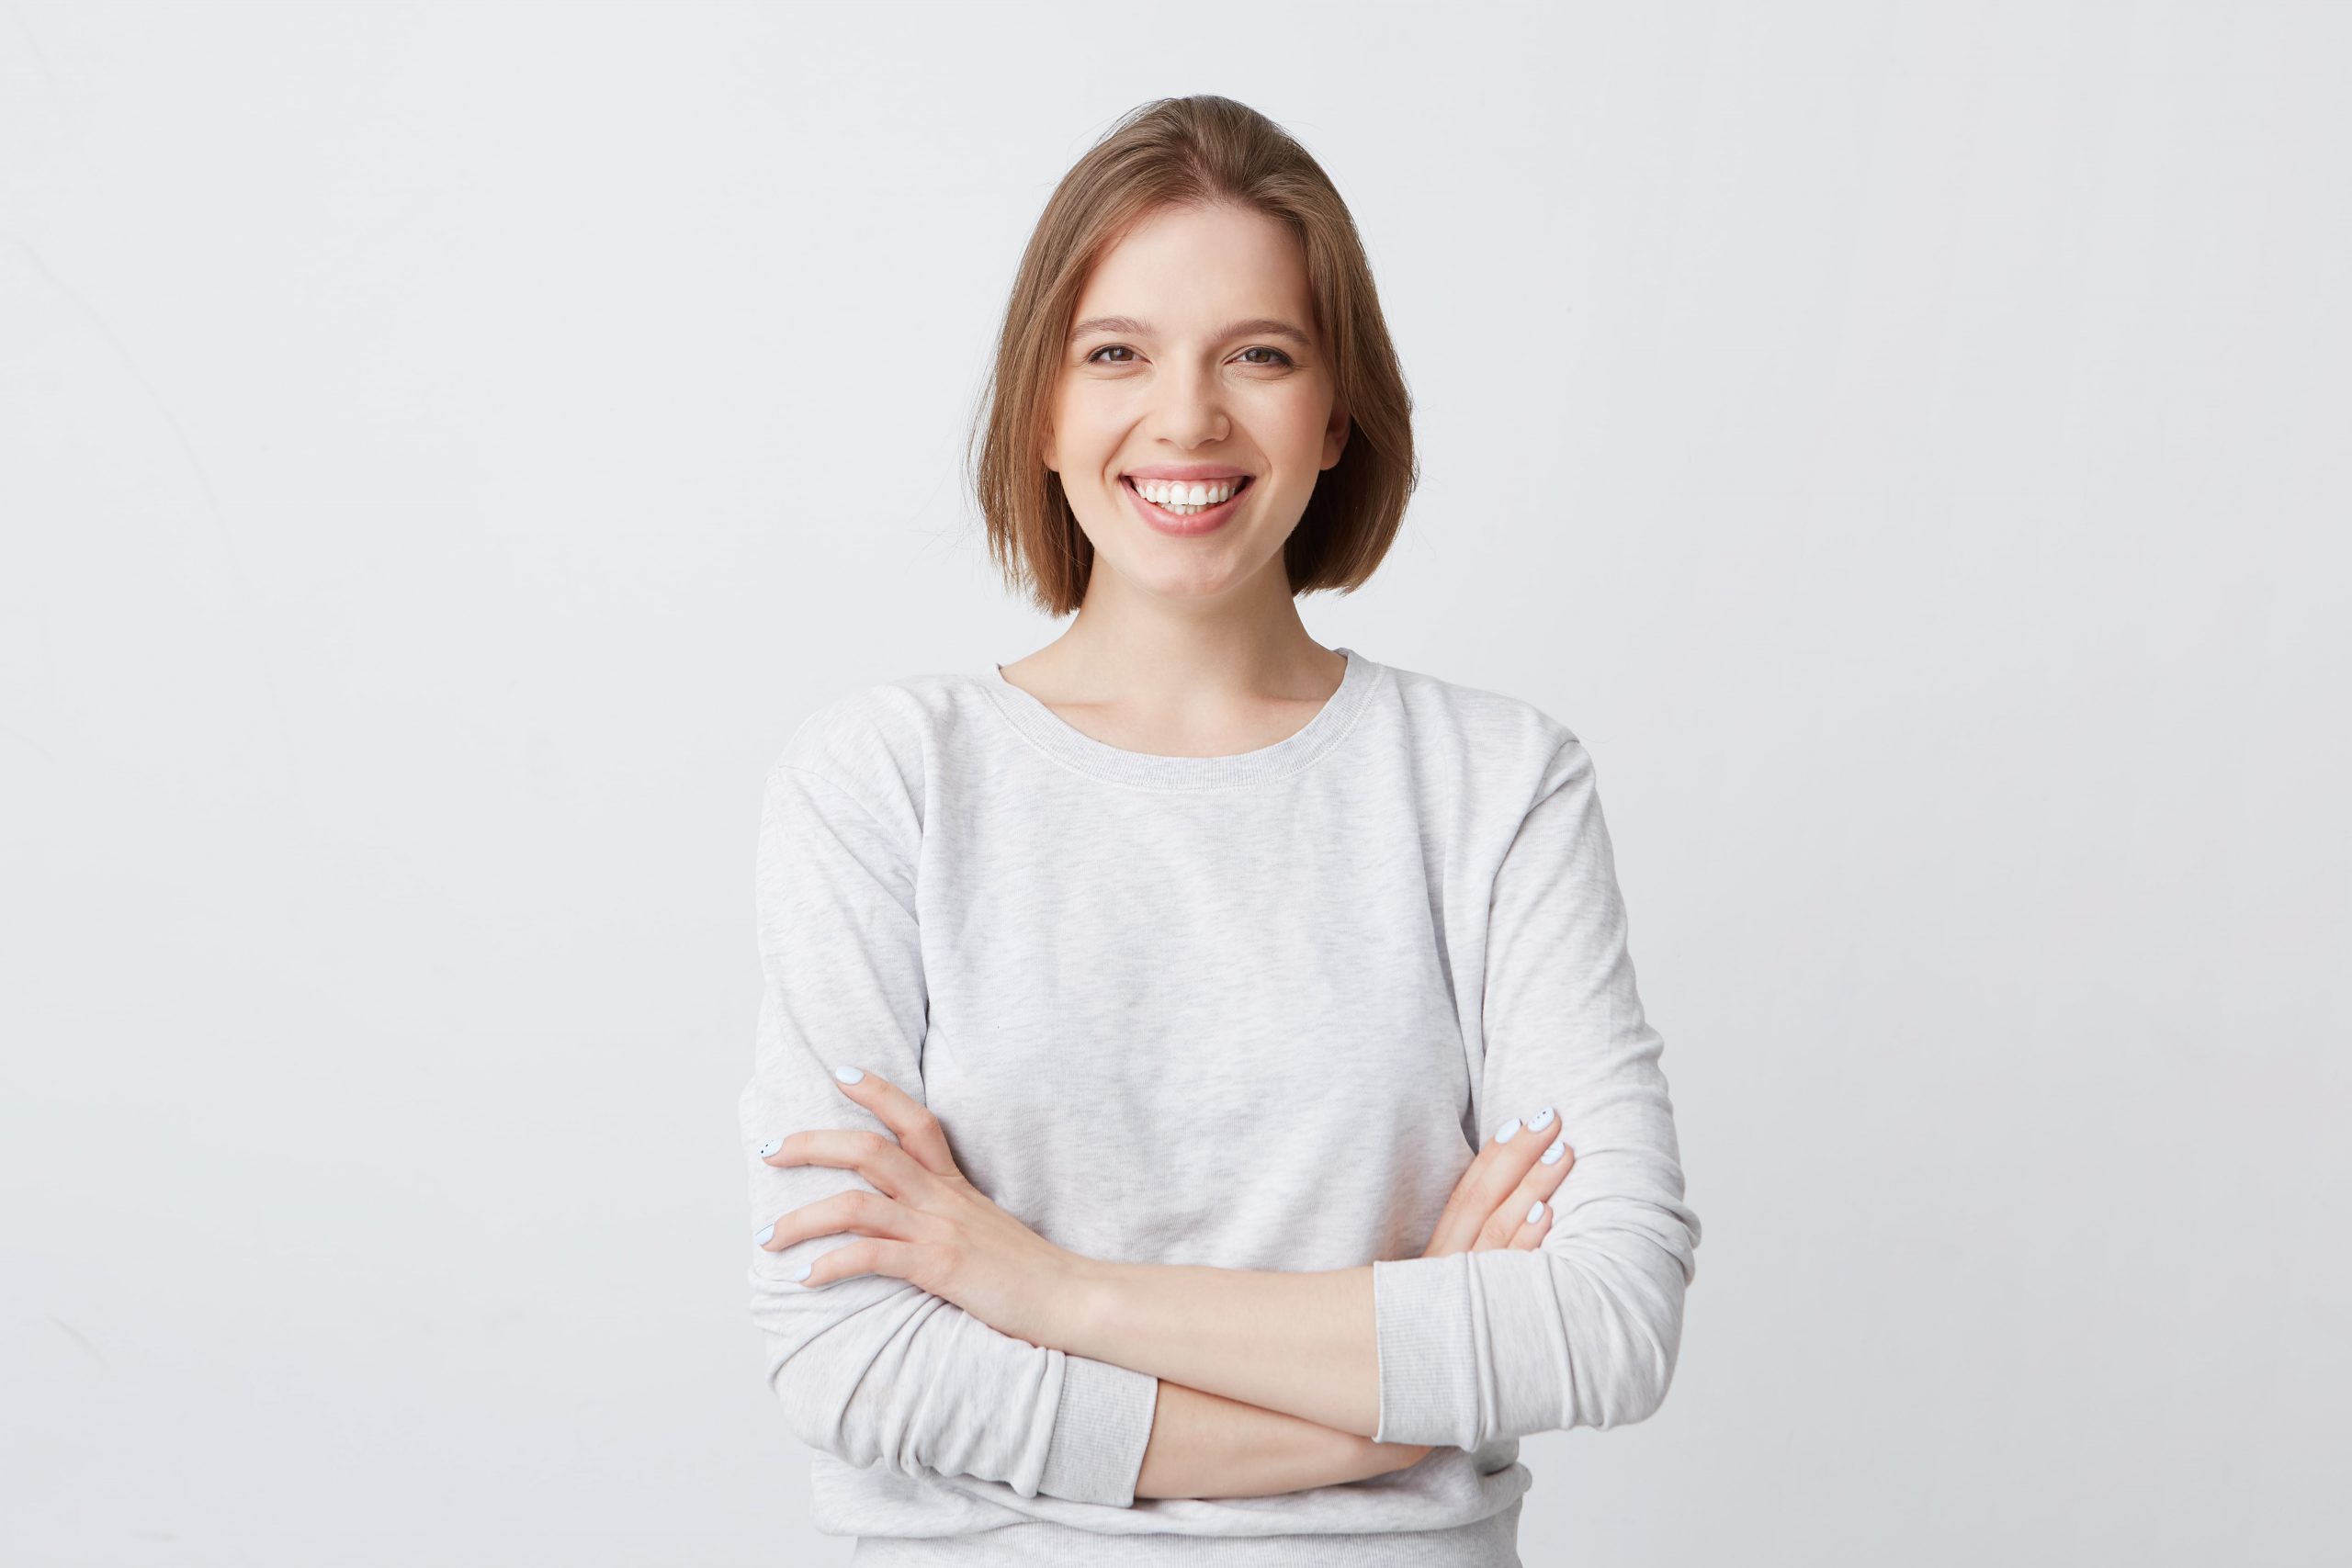 portrait-cheerful-attractive-young-woman-longsleeve-standing-with-arms-crossed-smiling-min